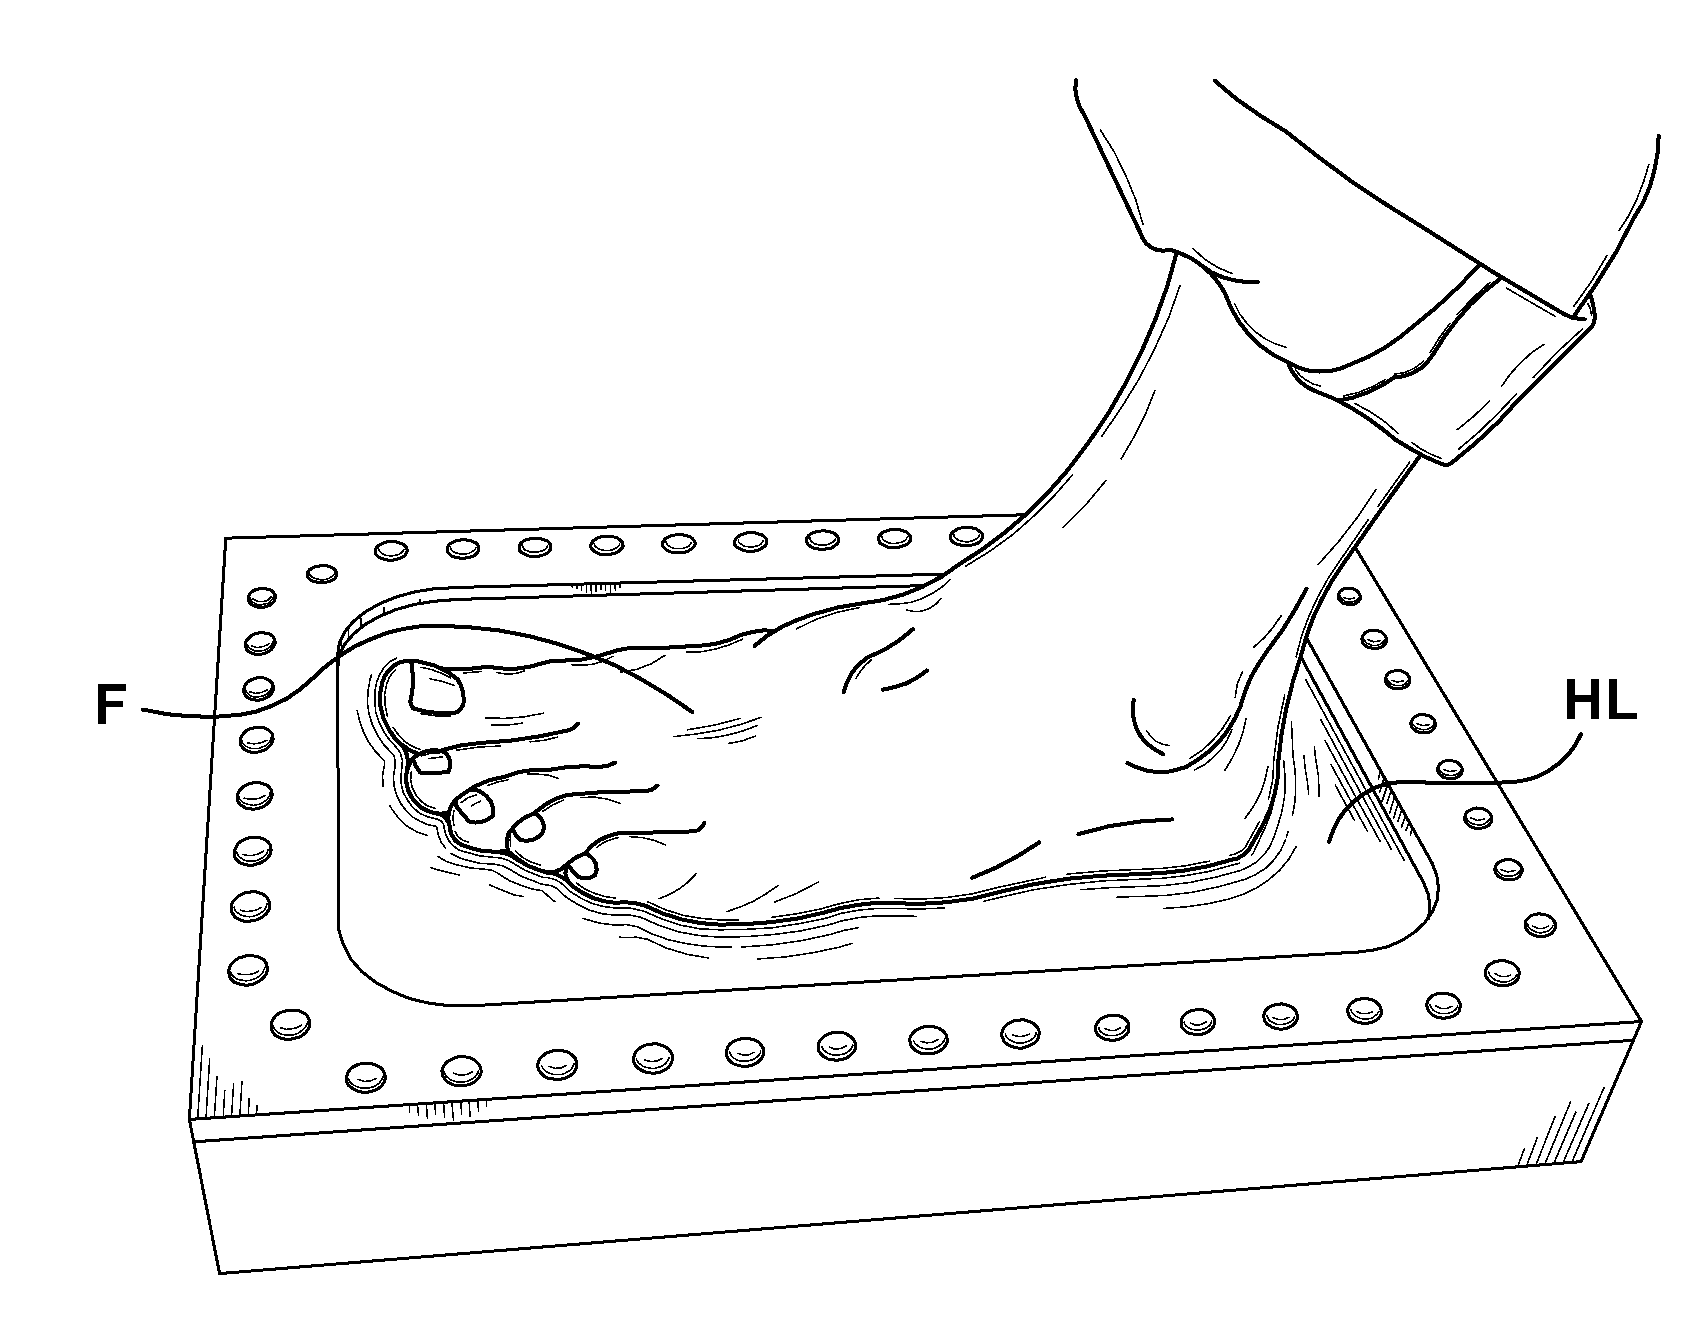 Method for Design and Manufacture of Insoles